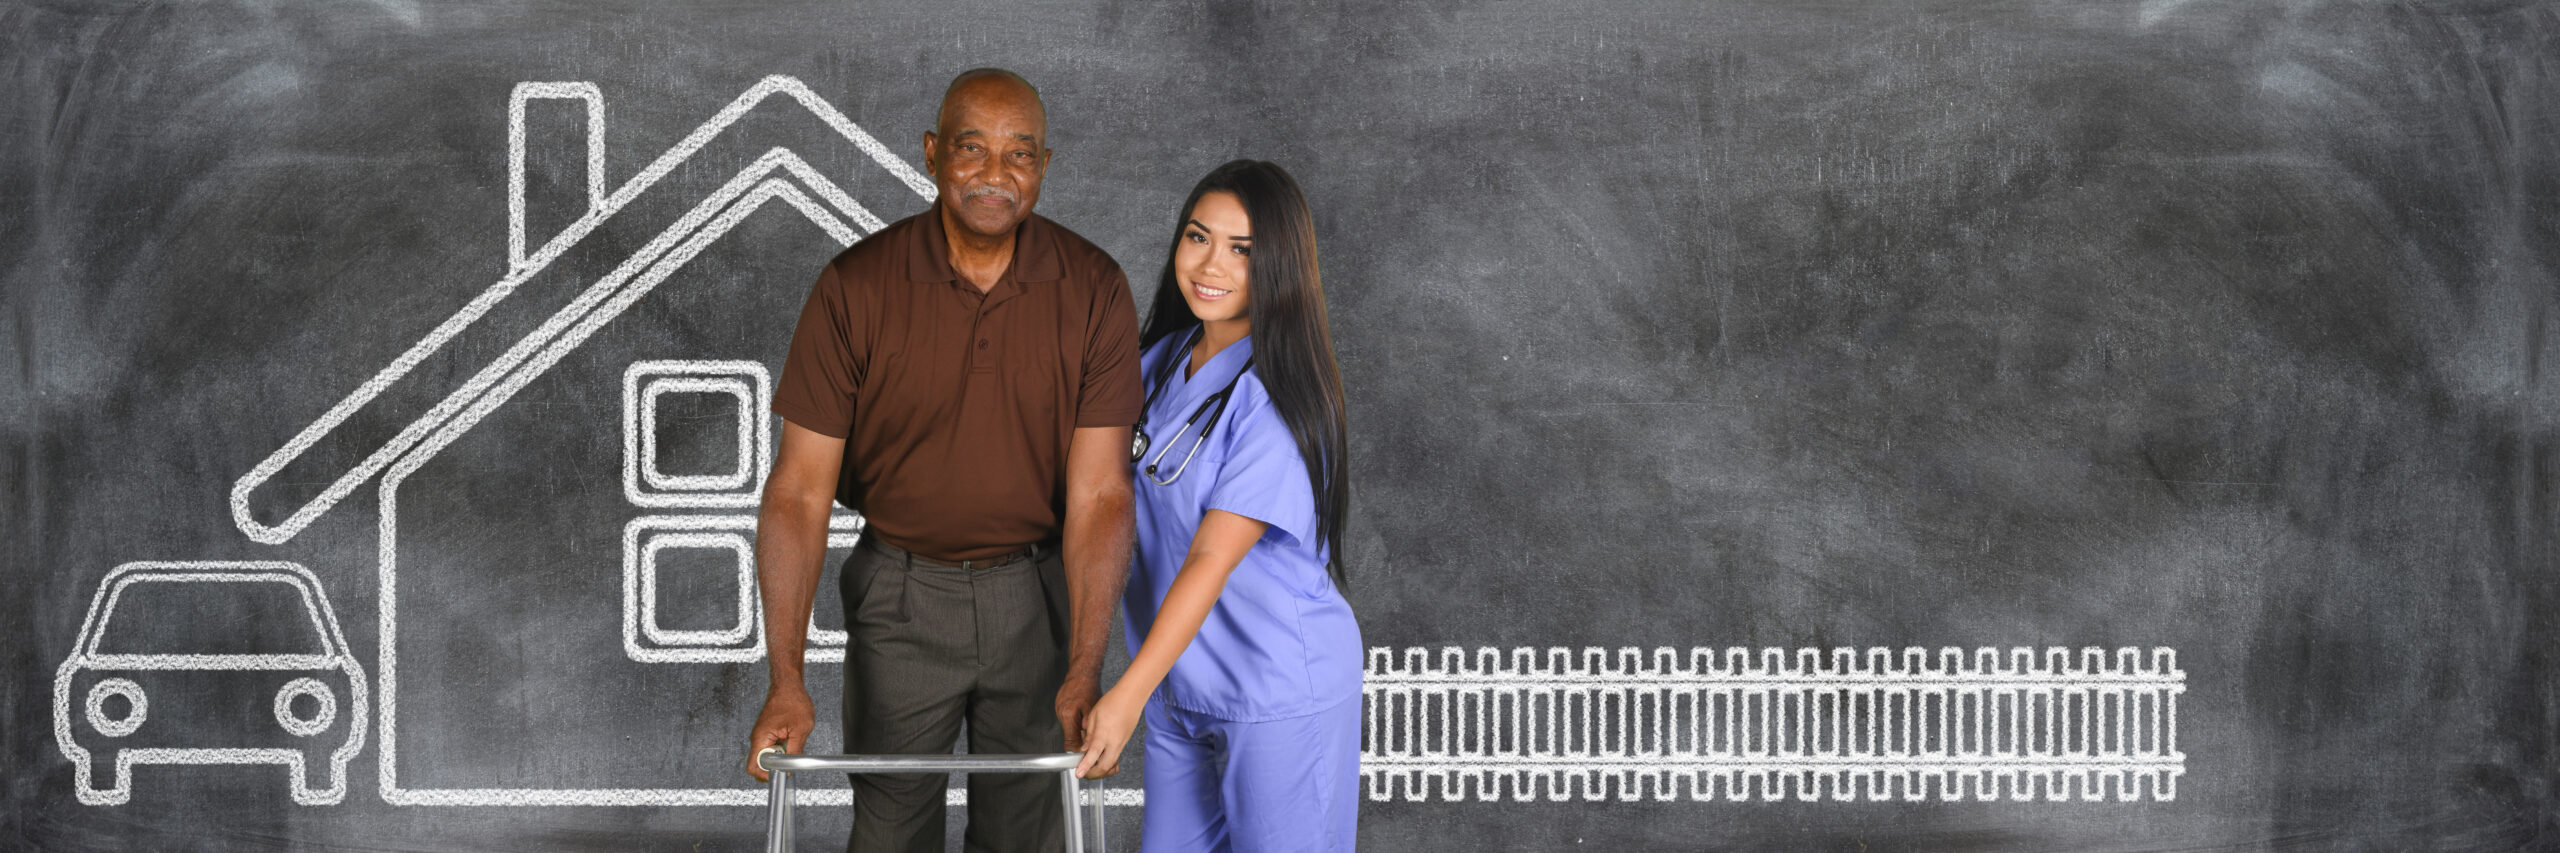 Elderly African American patient with a walker being assisted by young, female nurse in front of a black and white chalk drawing of a house, fence, and car